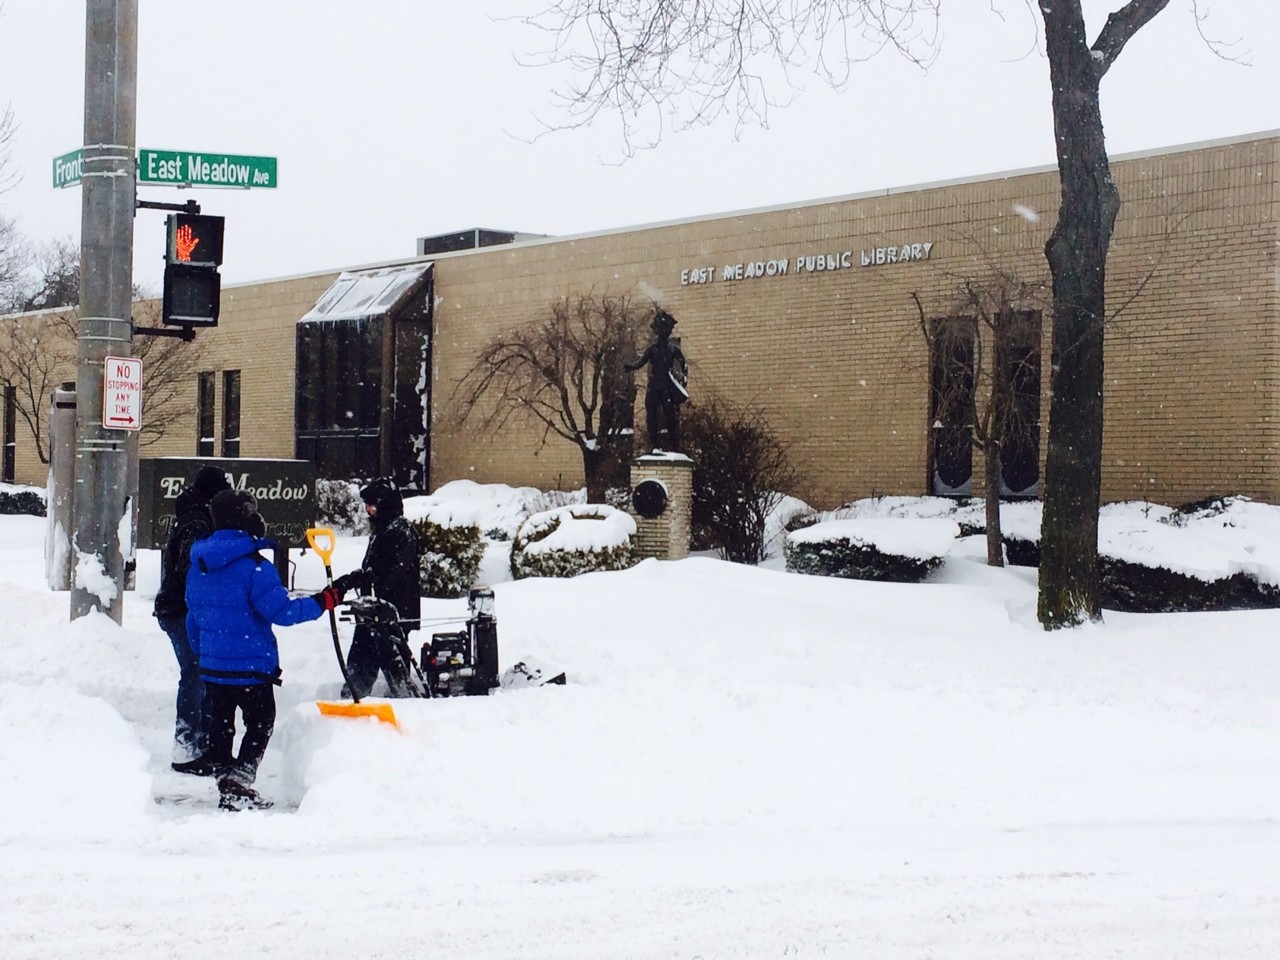 Shovelers dug out snow in front of the East Meadow Public Library.